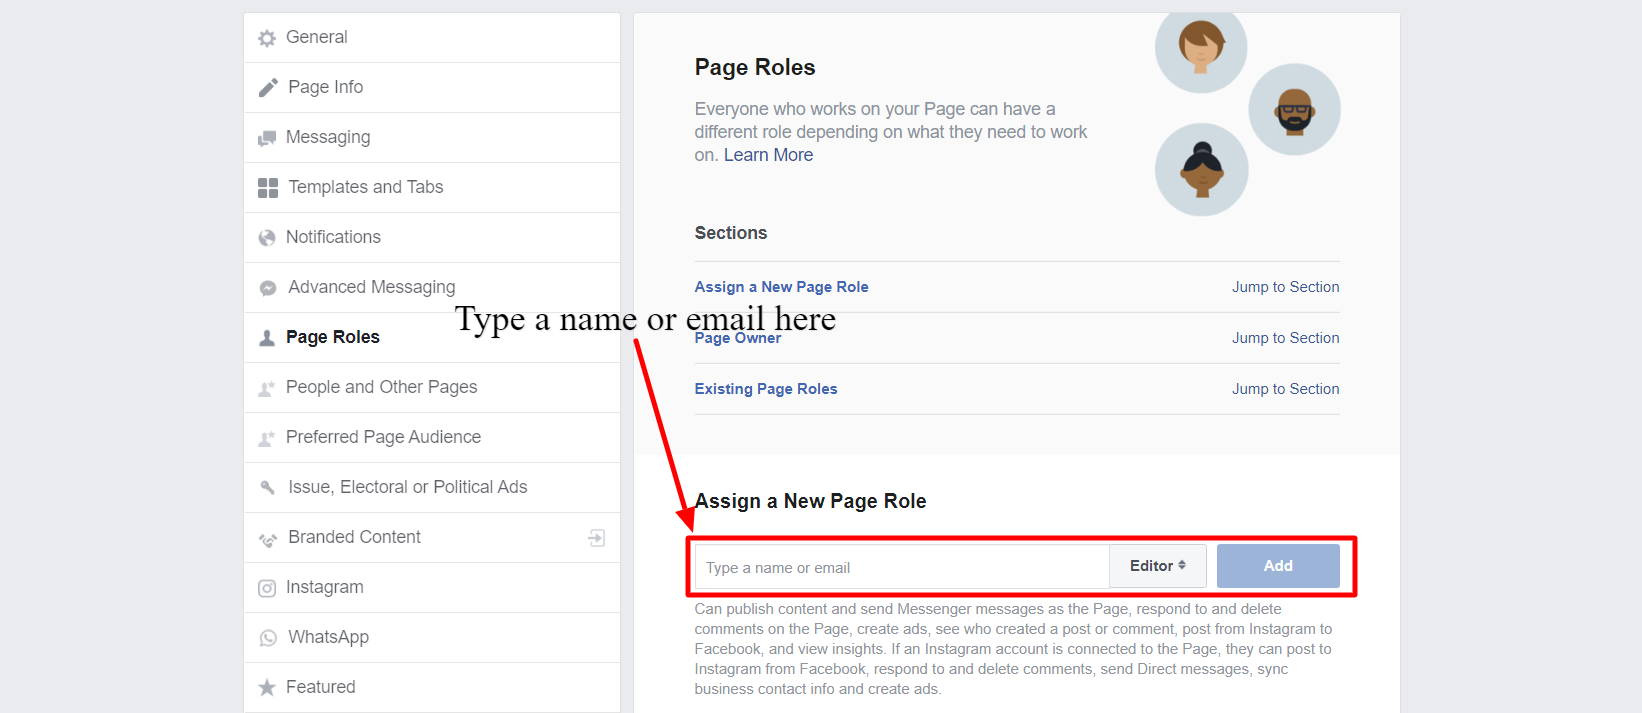 Type a name or email - How To Provide Facebook Page Admin Rights?